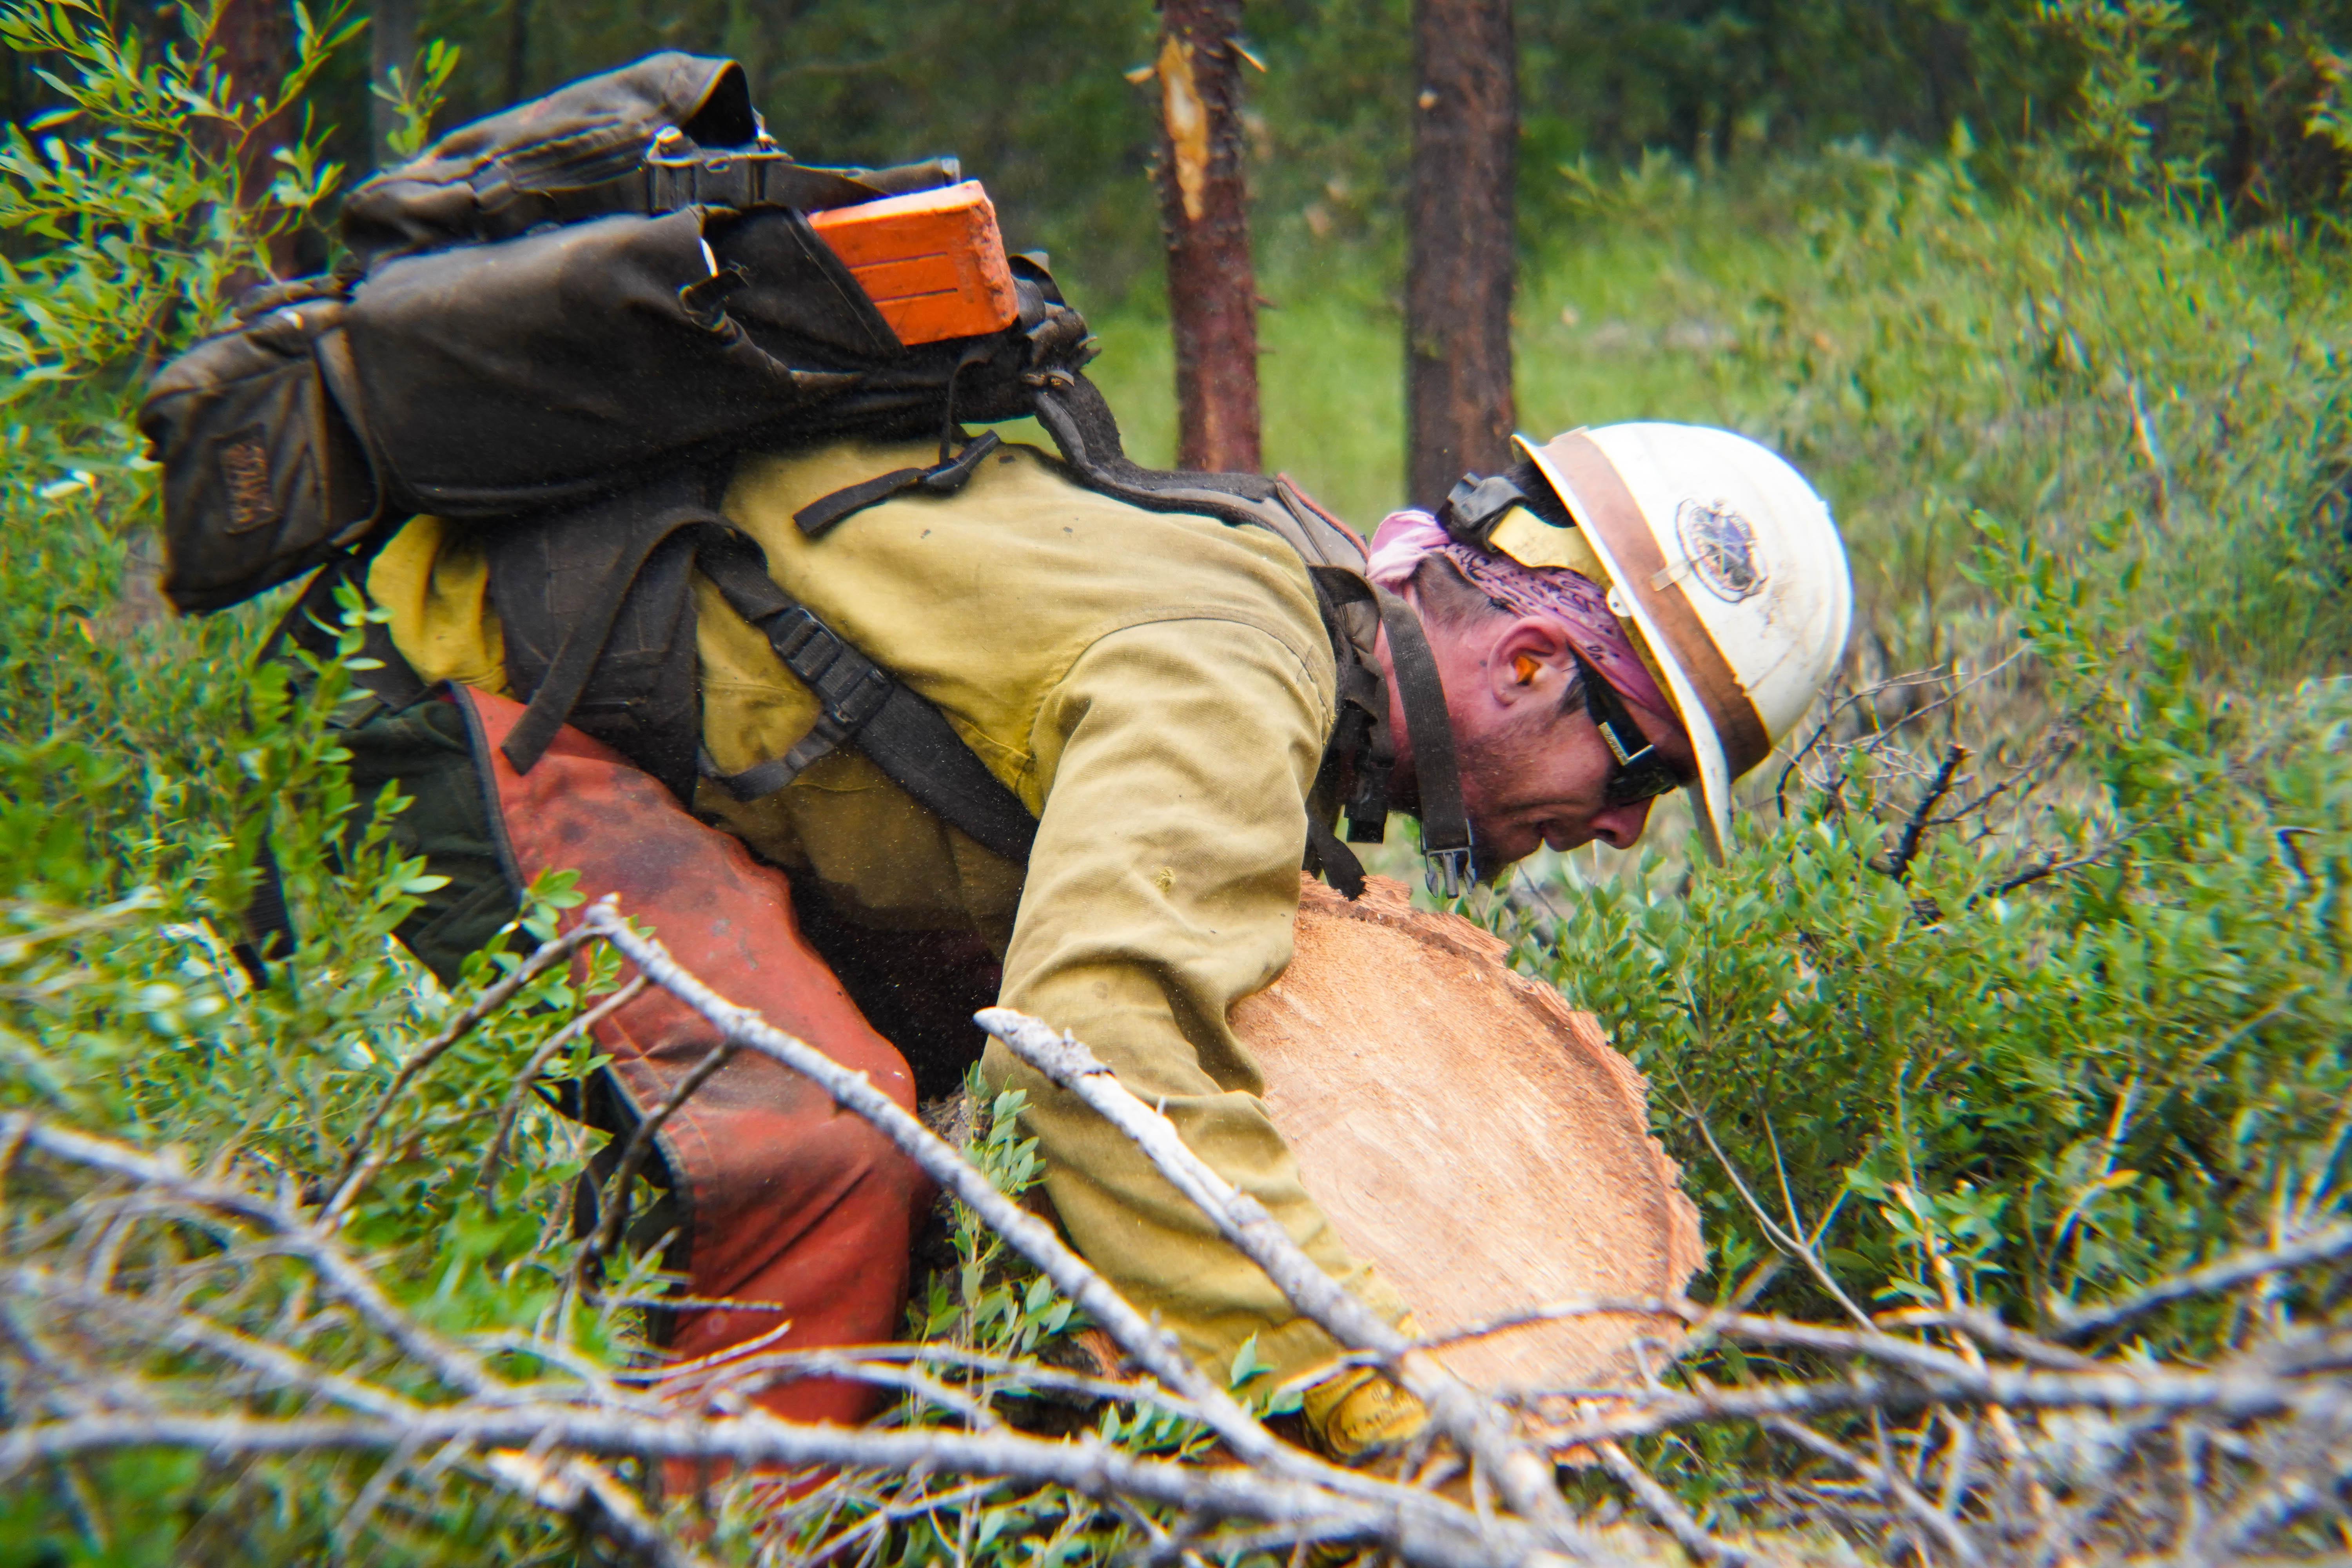 A male wildland firefighter lifts a log as part of structure defense operations in a densely forested area.